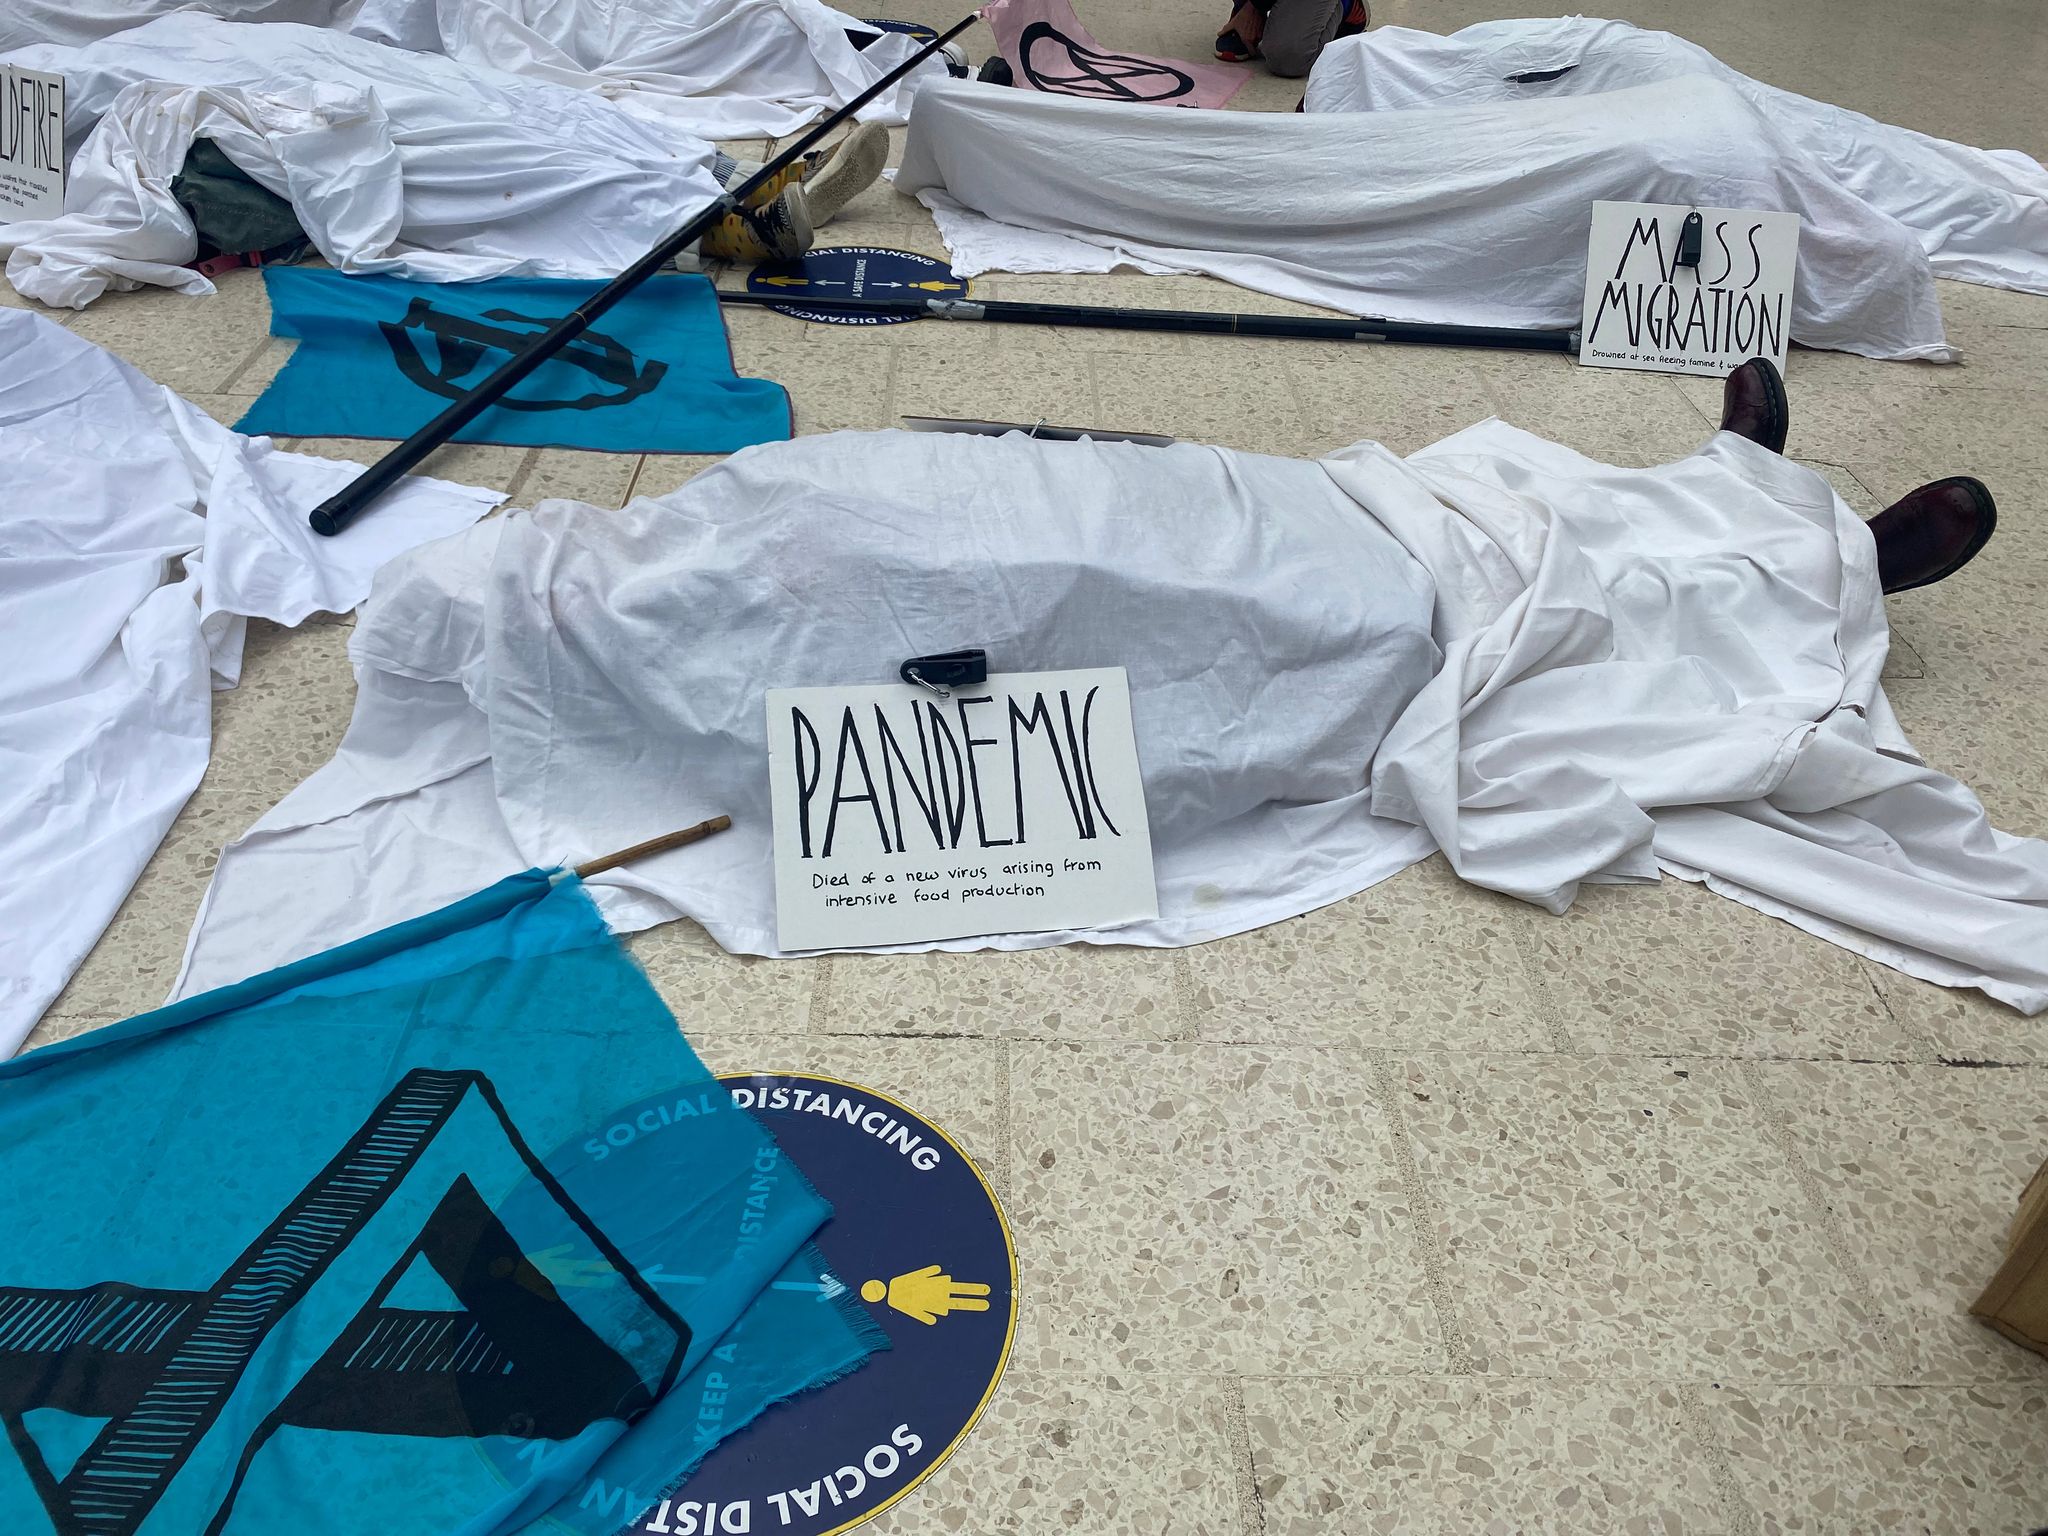 Protestors staged a 'die-in' at Glasgow Central Station